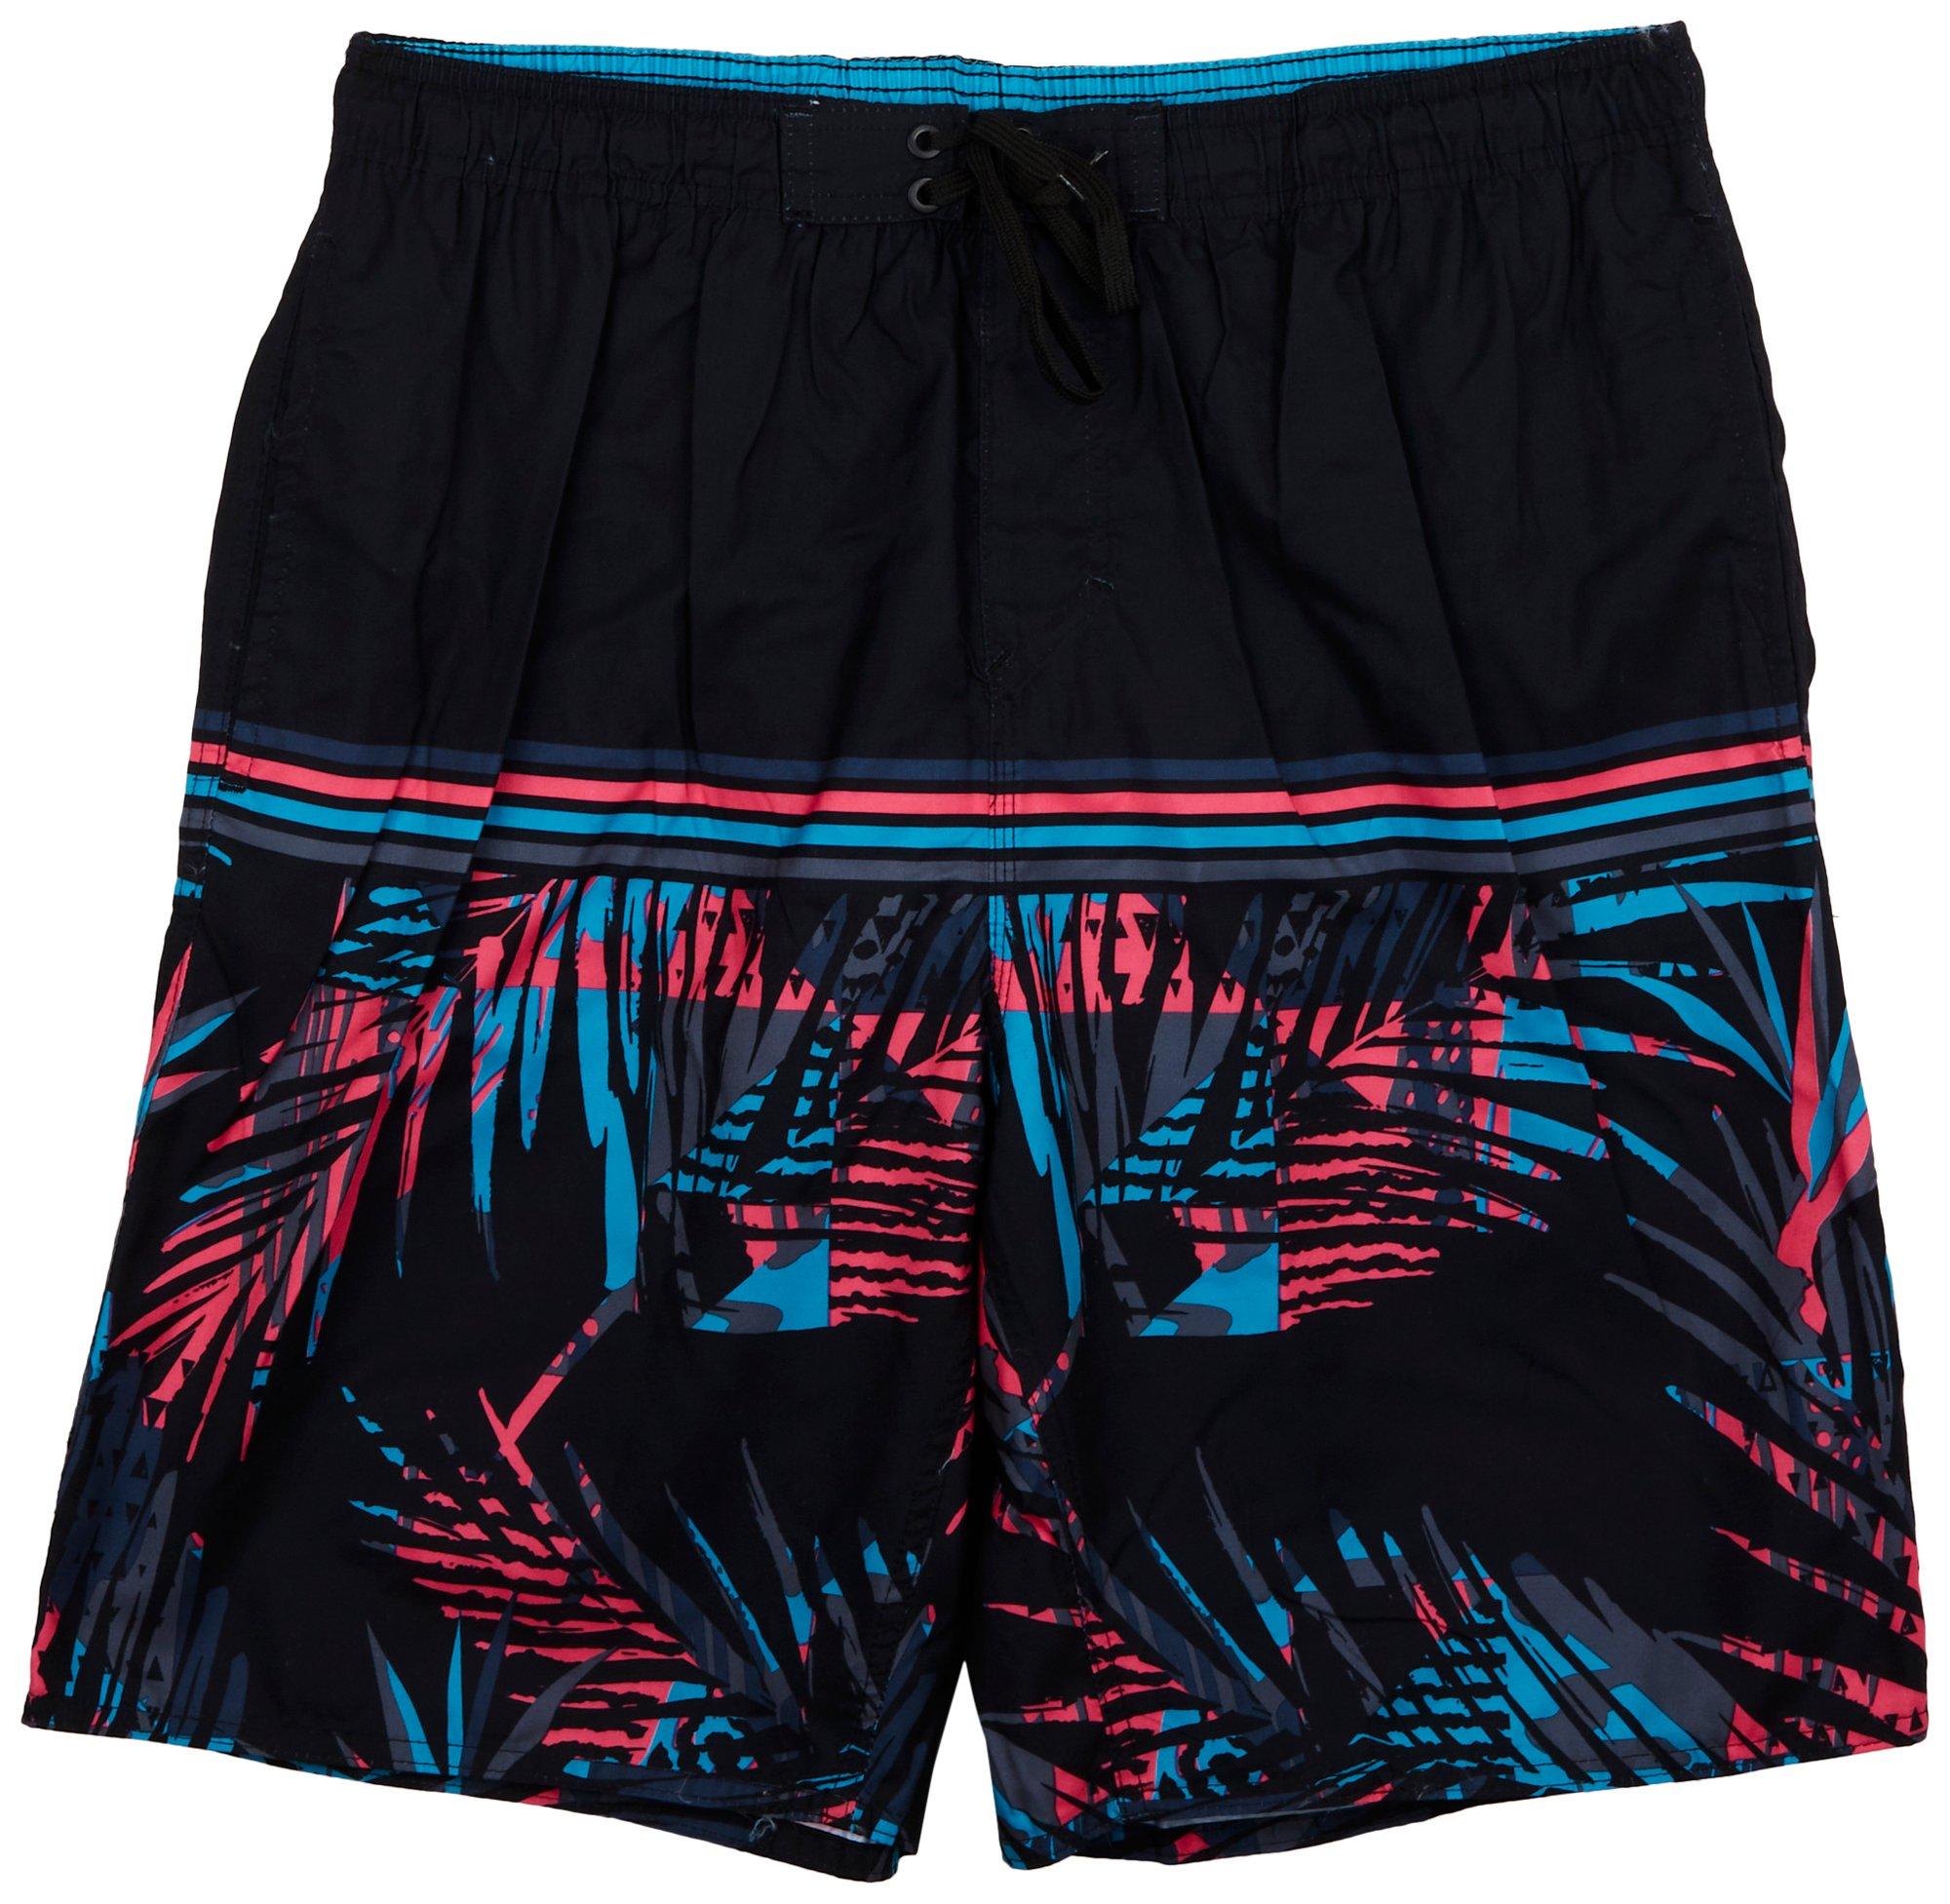 Men's Under Armour Beach Volleyball Shorts Black & Teal Swimming Trunks  Size 36